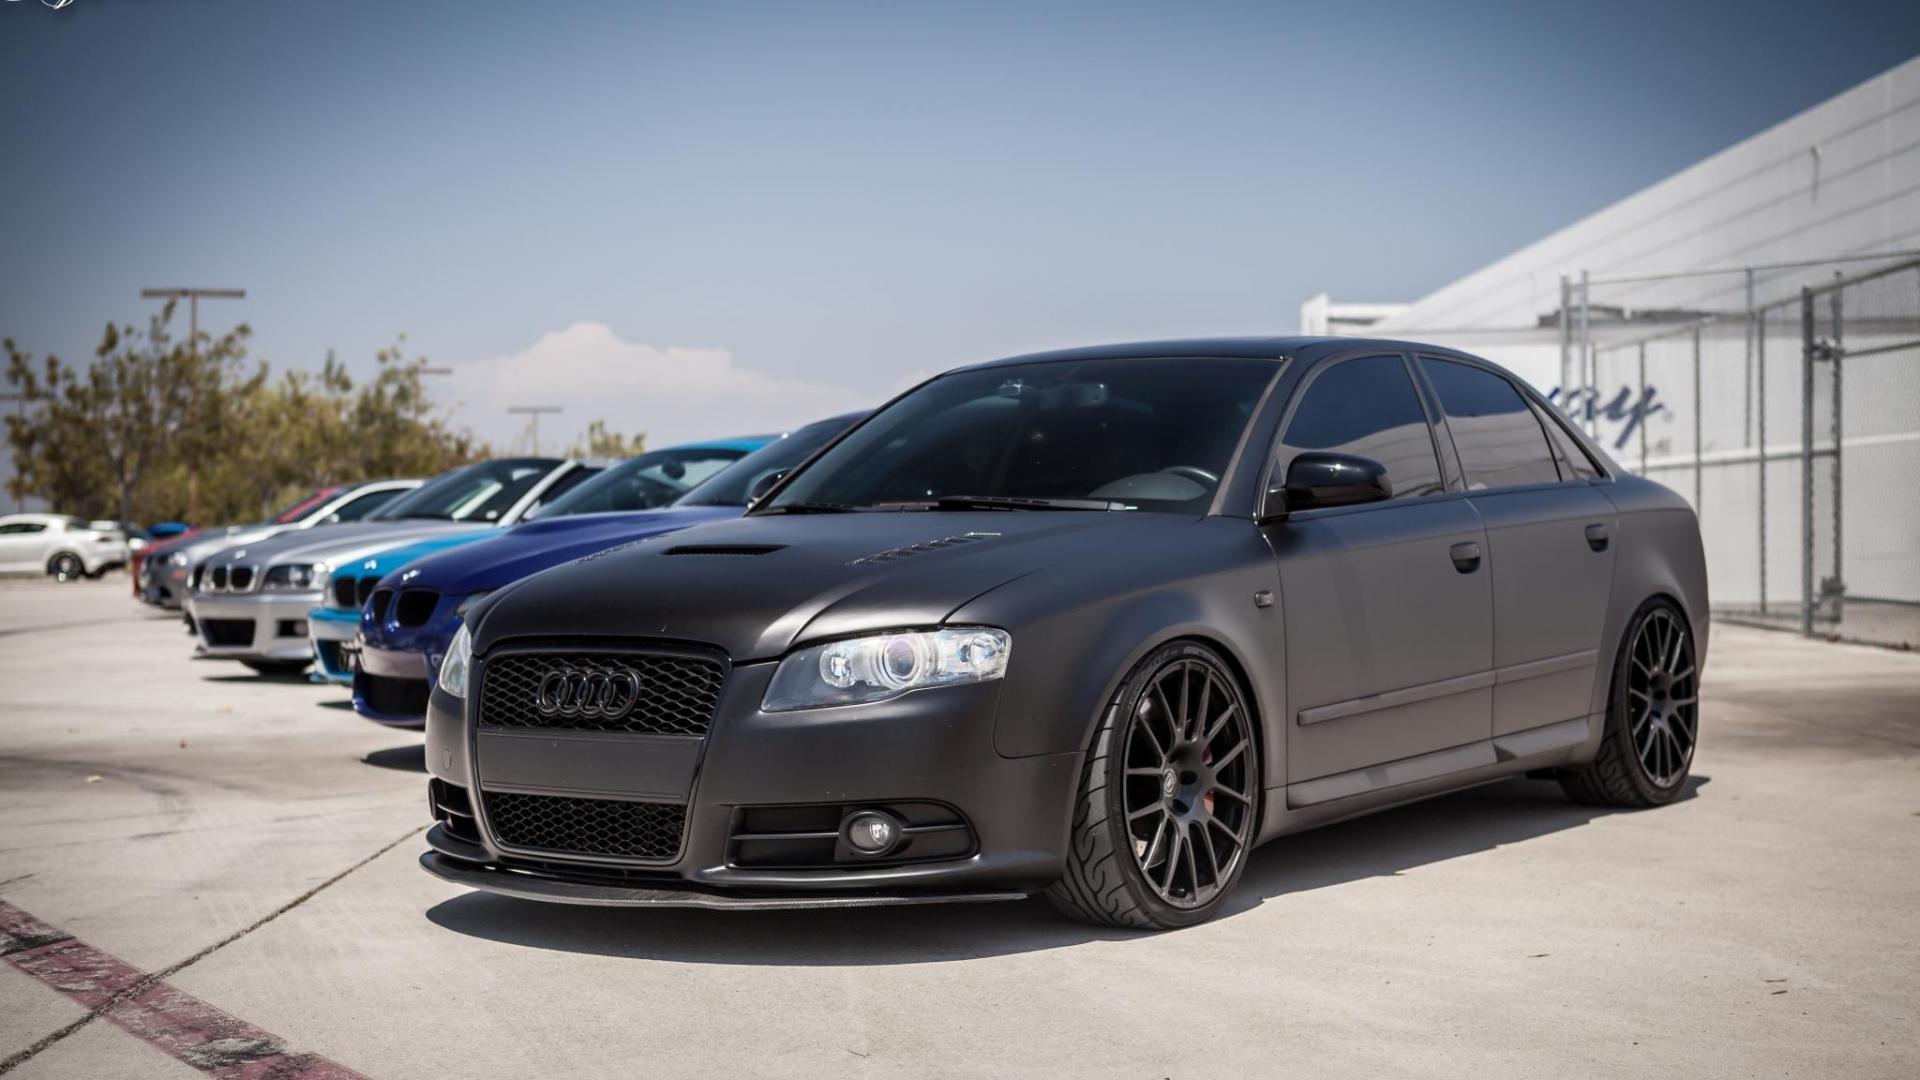 Audi Rs4 Wallpaper Related Keywords Amp Suggestions